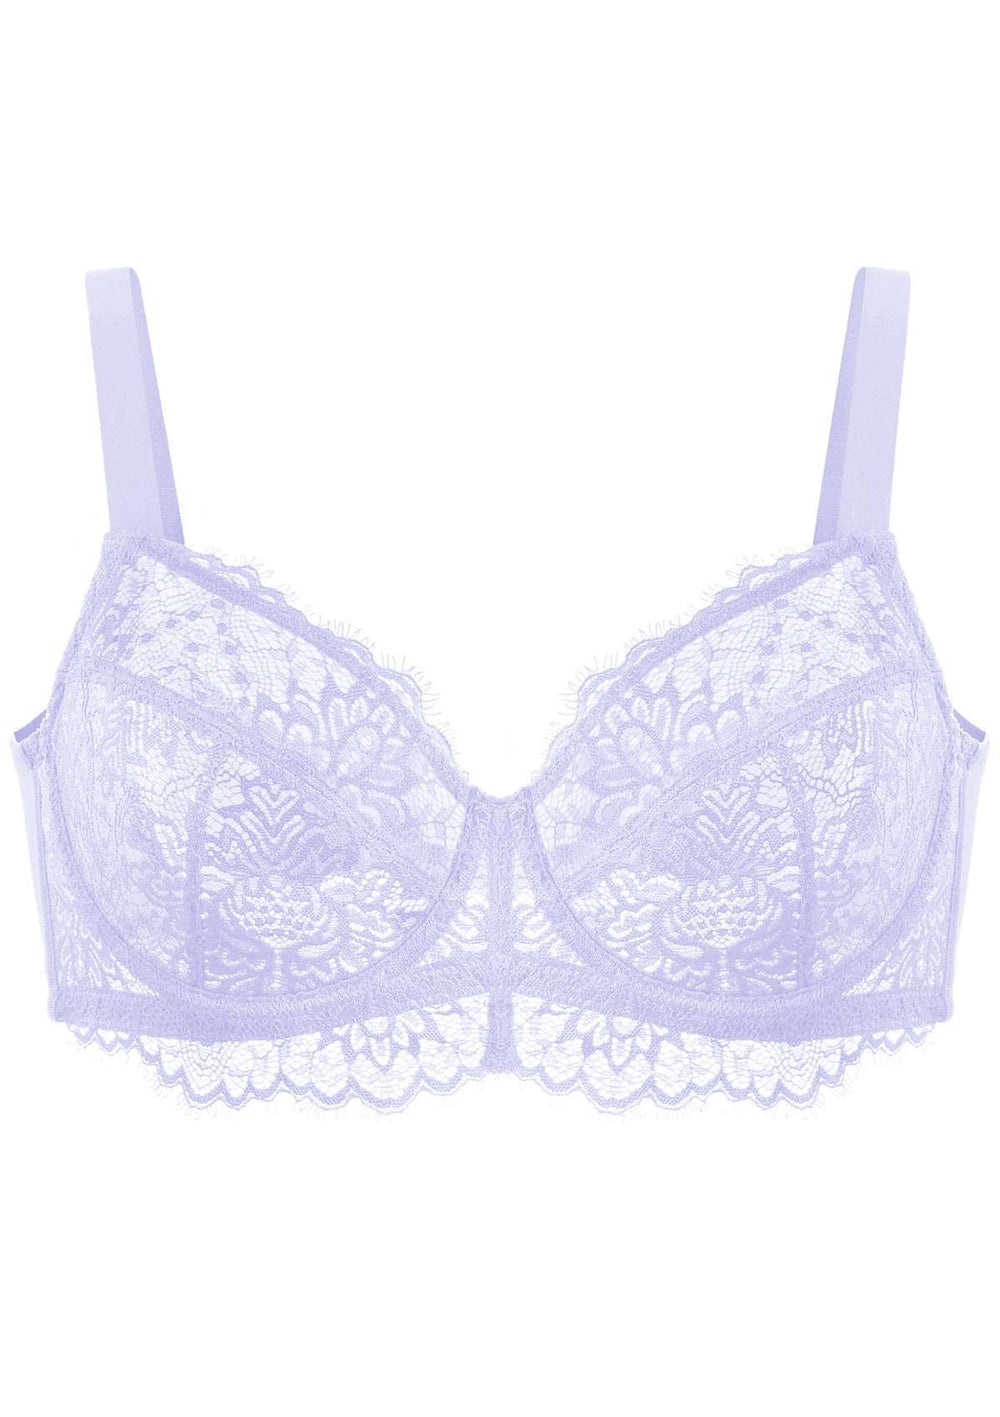 Purple Lace Brassiere Isolated On White. Stock Photo, Picture and Royalty  Free Image. Image 120721881.